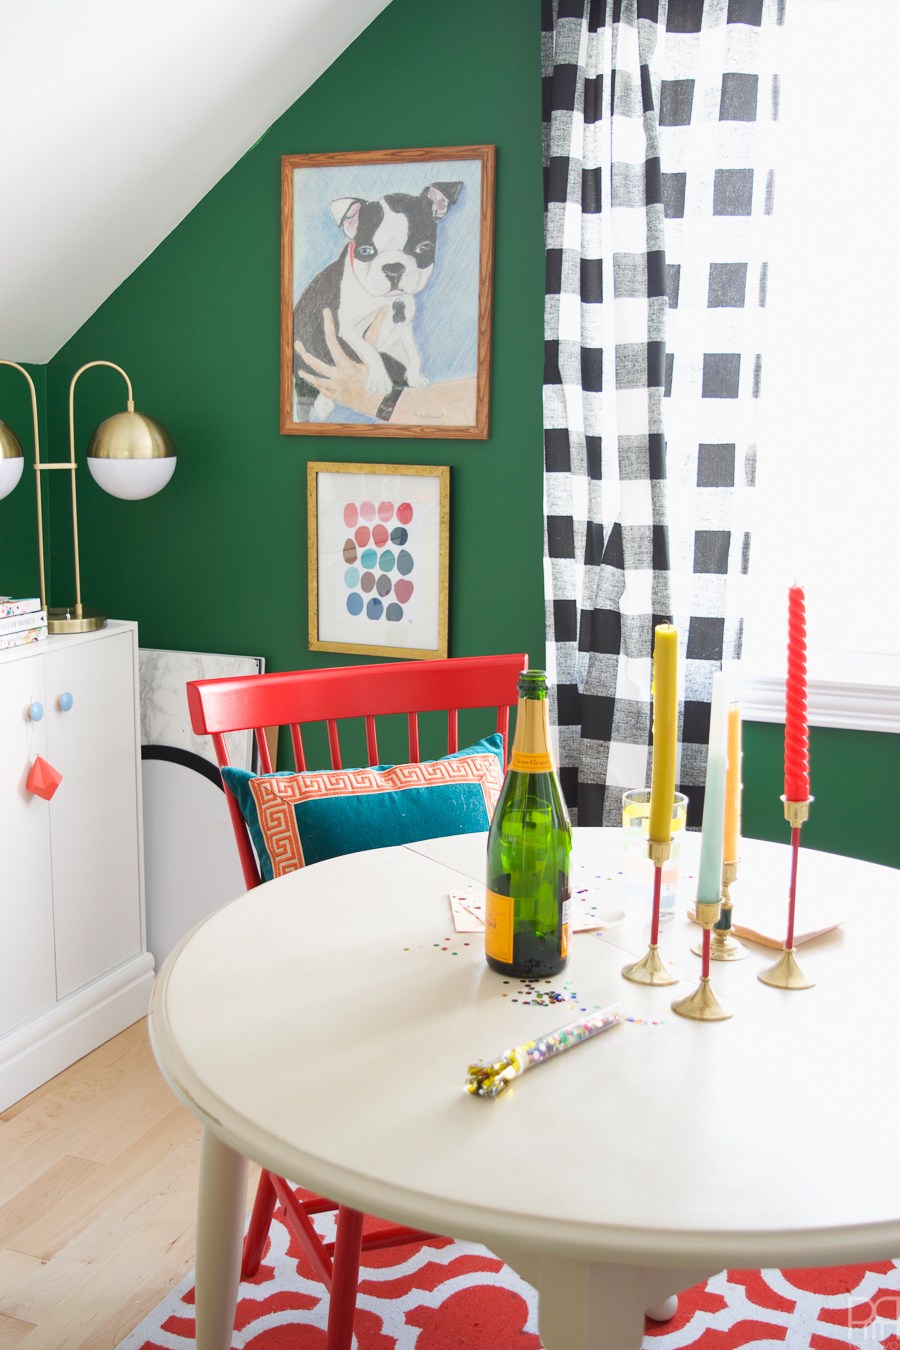 Eclectic Home Tour of PMQ for Two - get tons of renter friendly decorating and DIY ideas like using color and art 